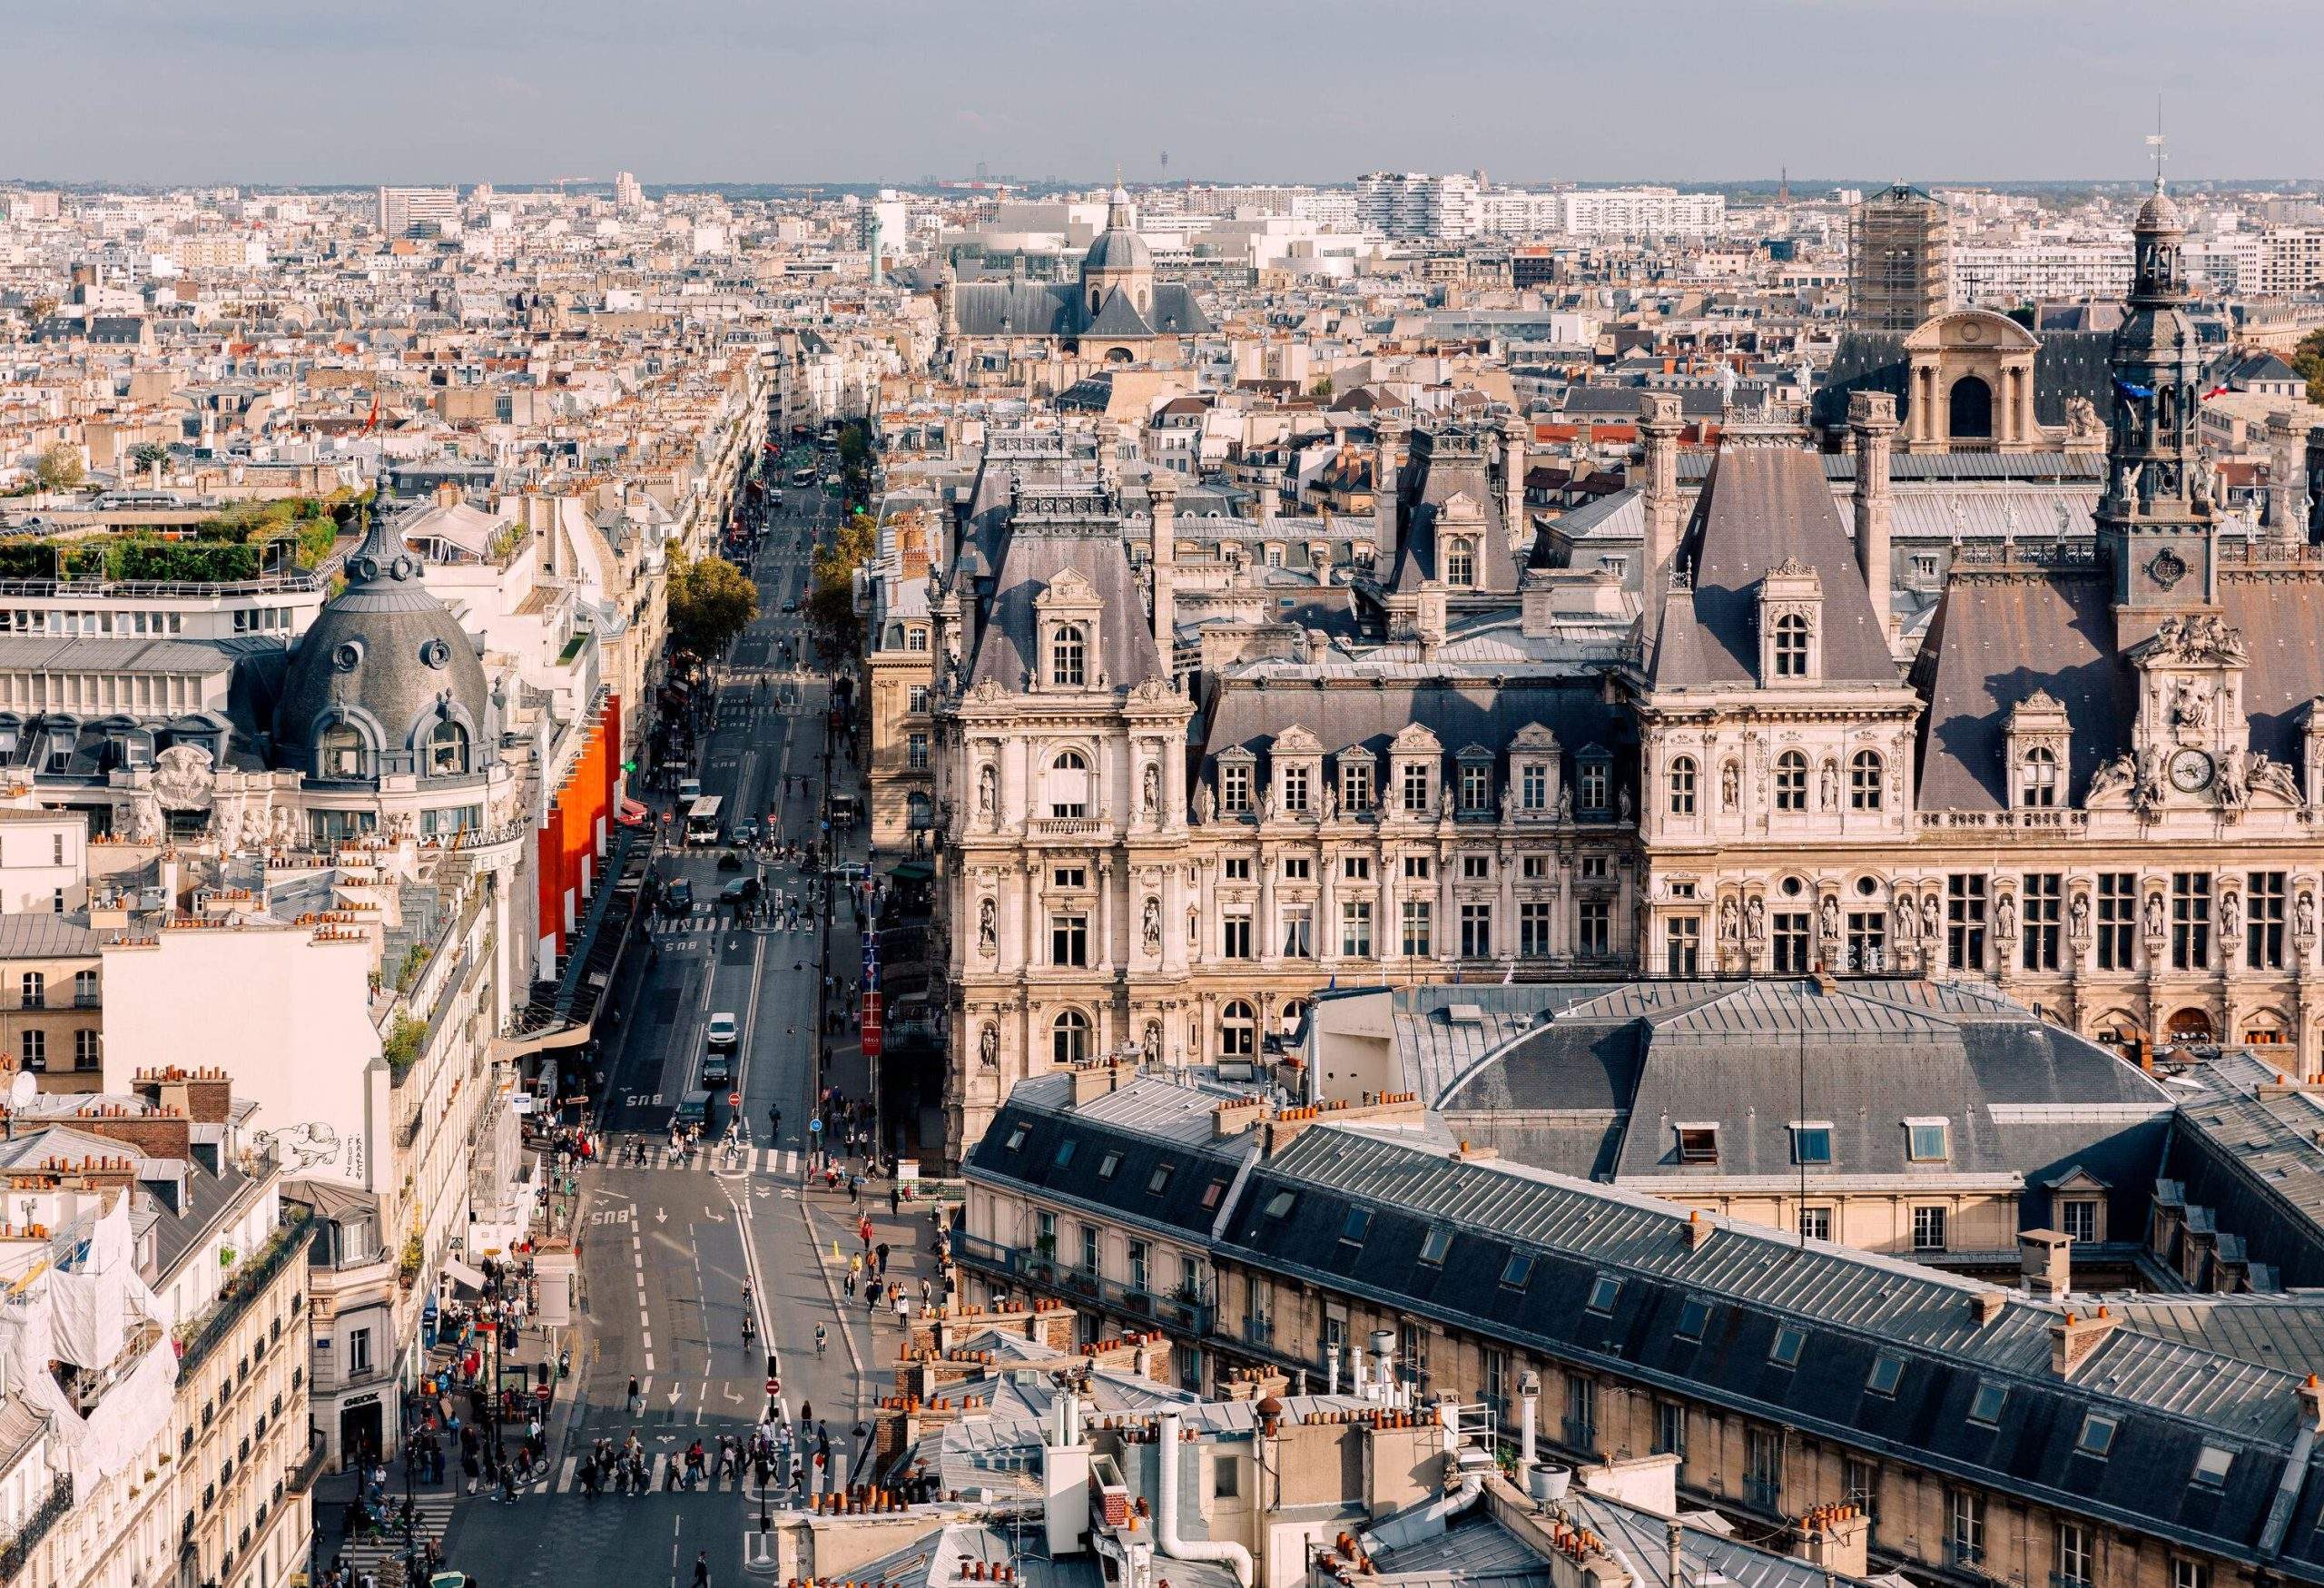 A Parisian skyline boasting its superb architecture along wide streets.